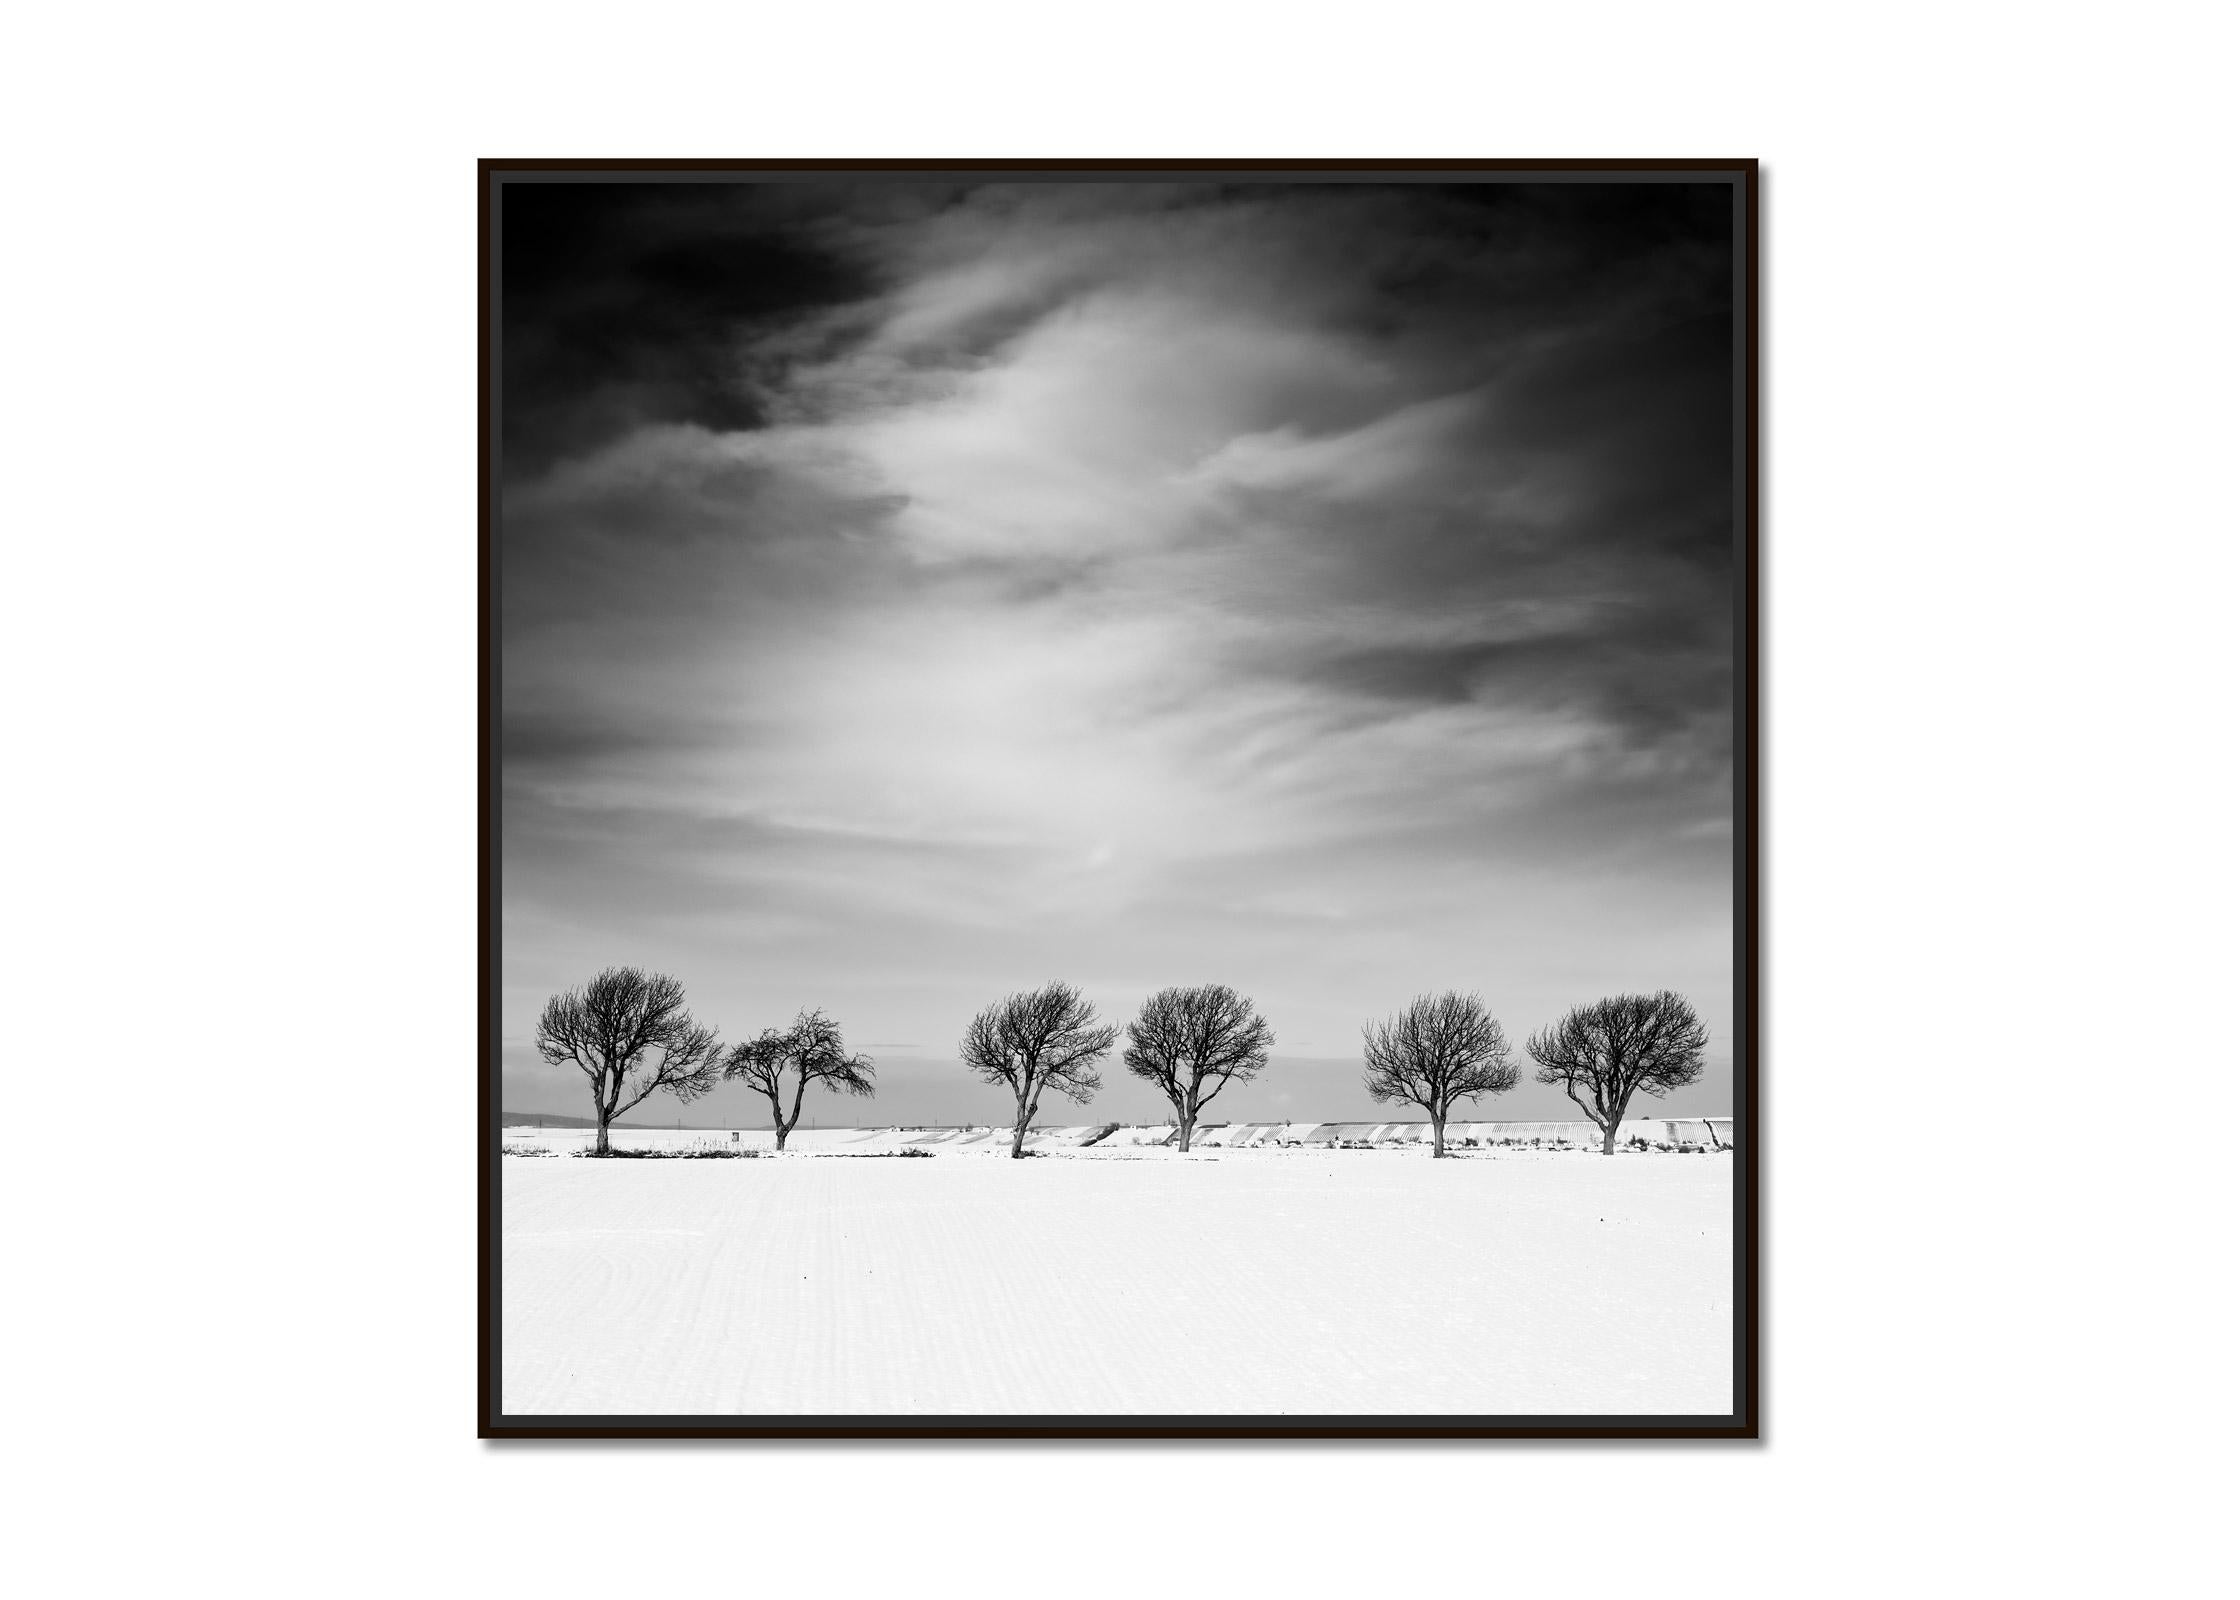 Cherry Tree Avenue, Winter, snowy Field, black and white landscape photography - Photograph by Gerald Berghammer